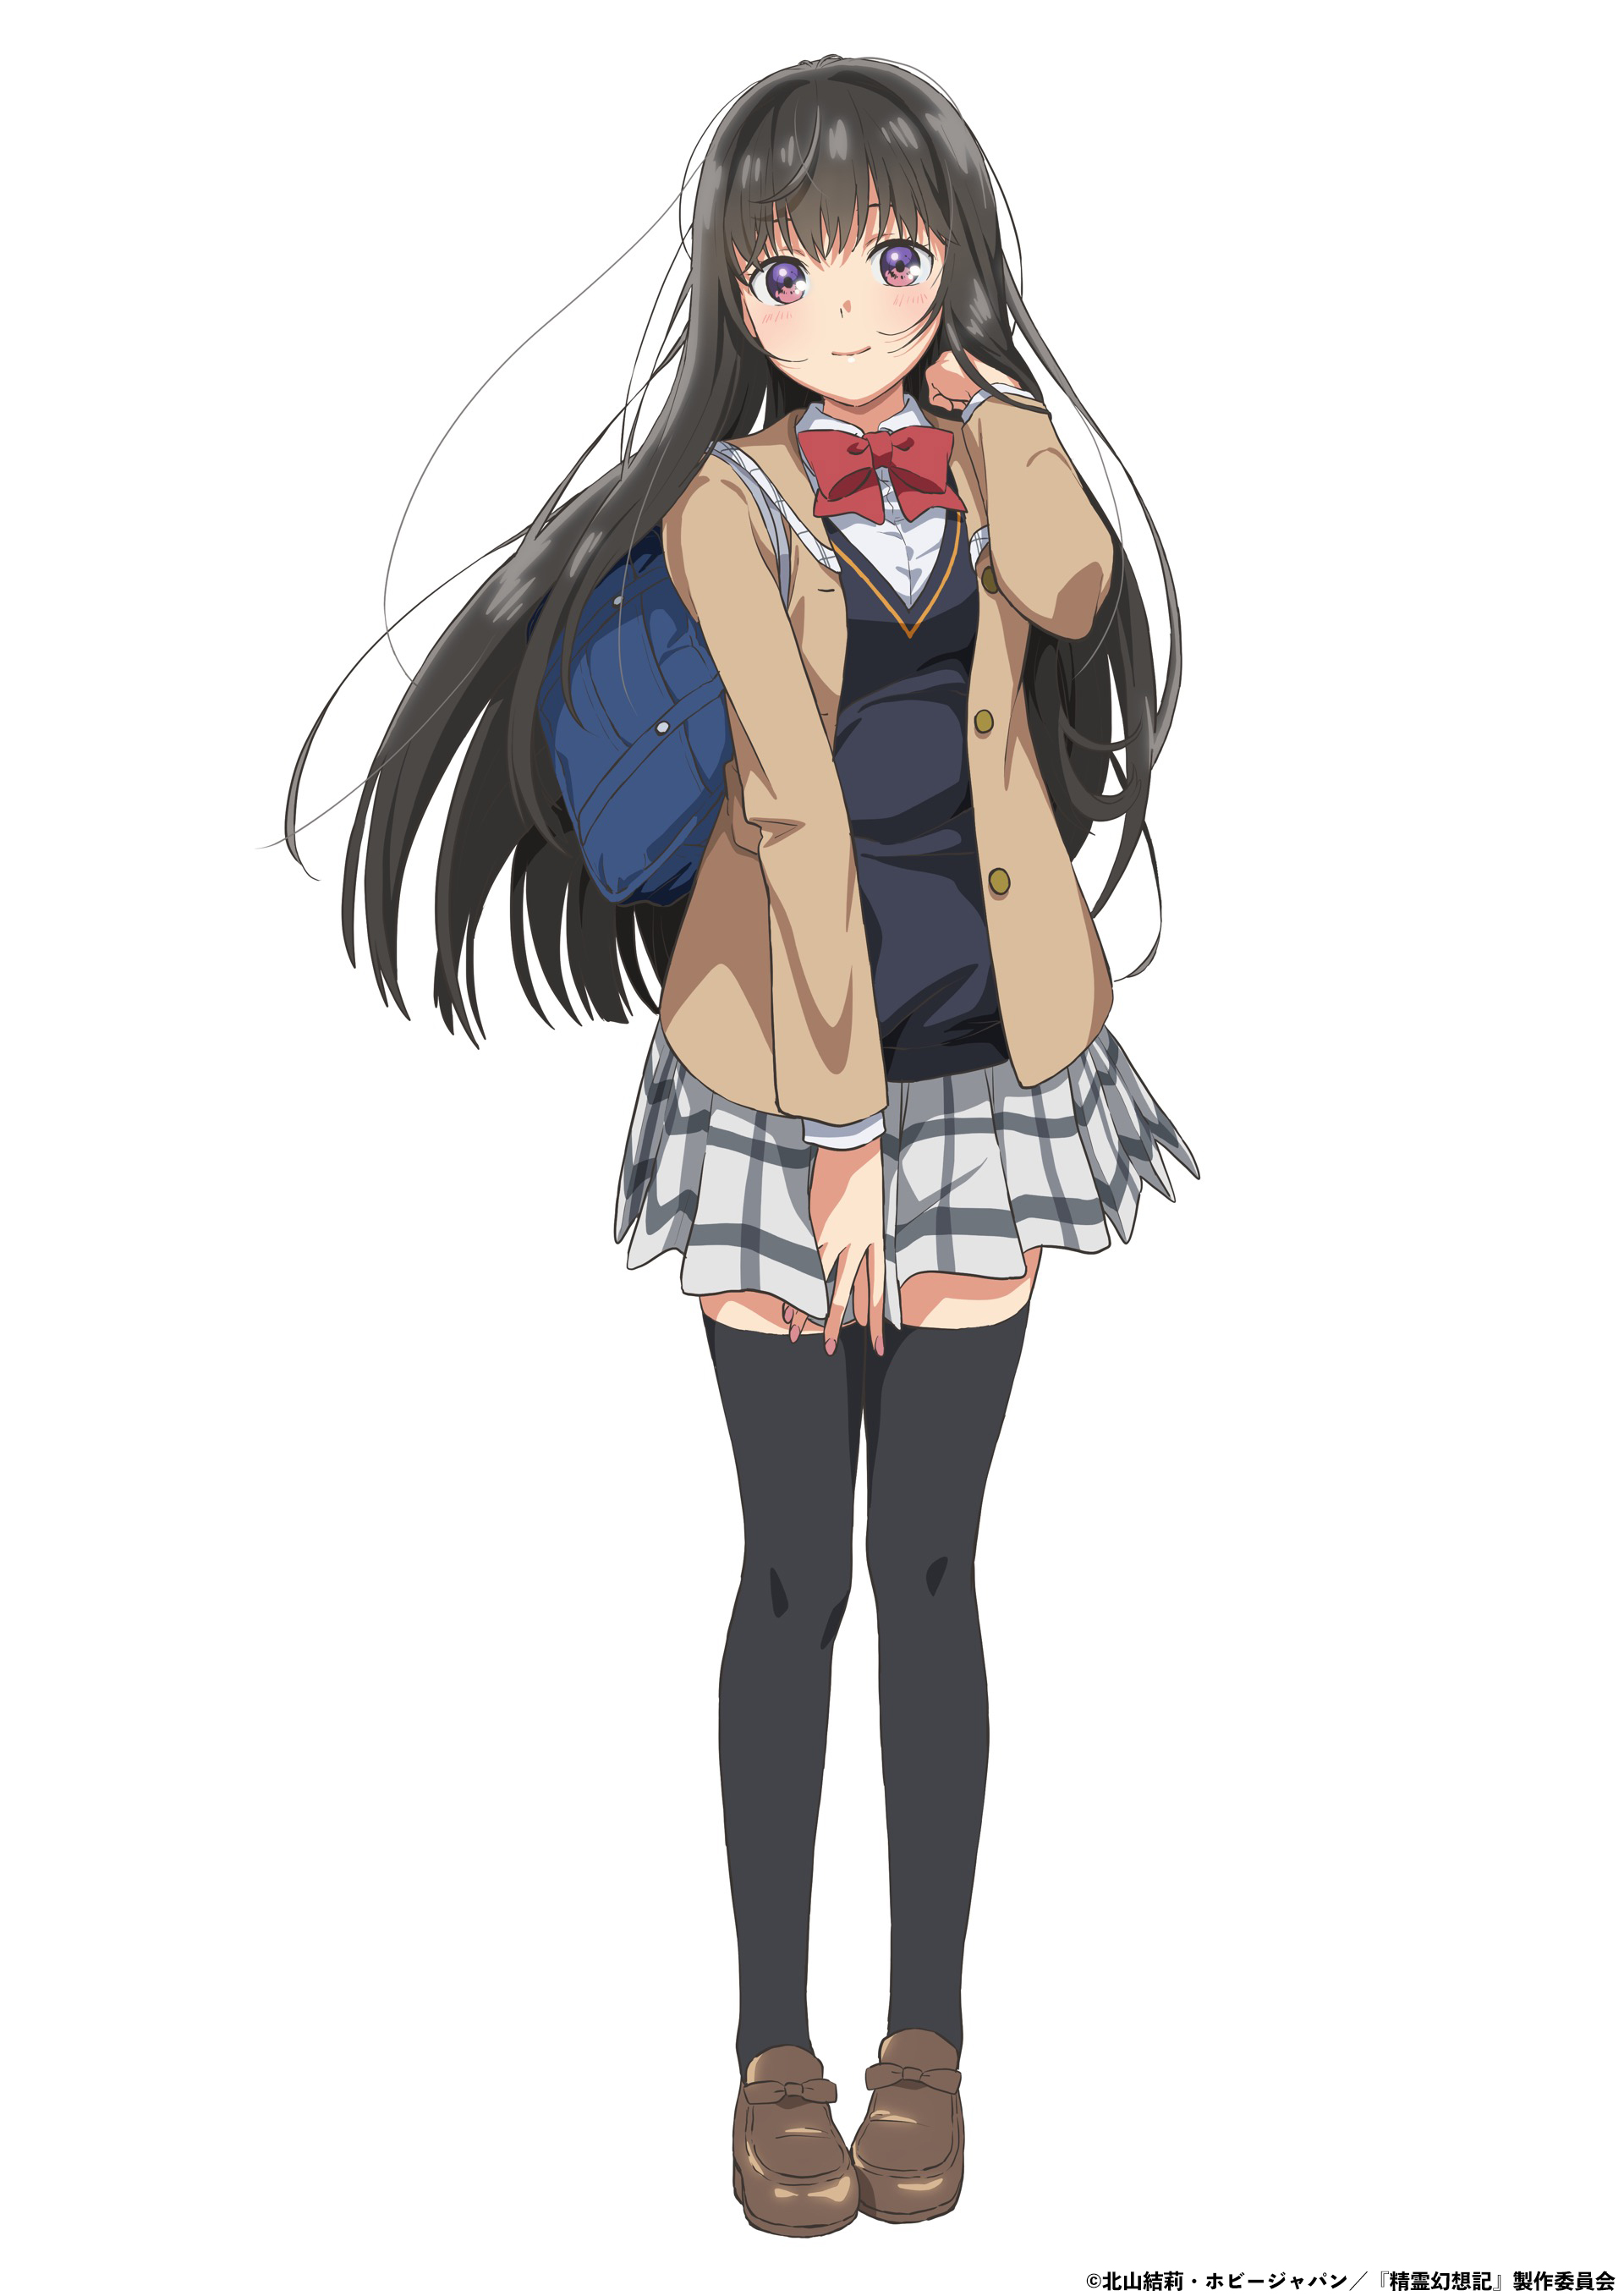 A character setting of Sayaka Harada from the upcoming Seirei Gensouki: Spirit Chronicles TV anime. Miharu appears as a high school girl with hip length black hair and violet eyes. She dresses in a school uniform with a red bow, brown blazer, black vest, a white and grey checkered skirt, and thigh high black stockings. She carries a blue back pack.